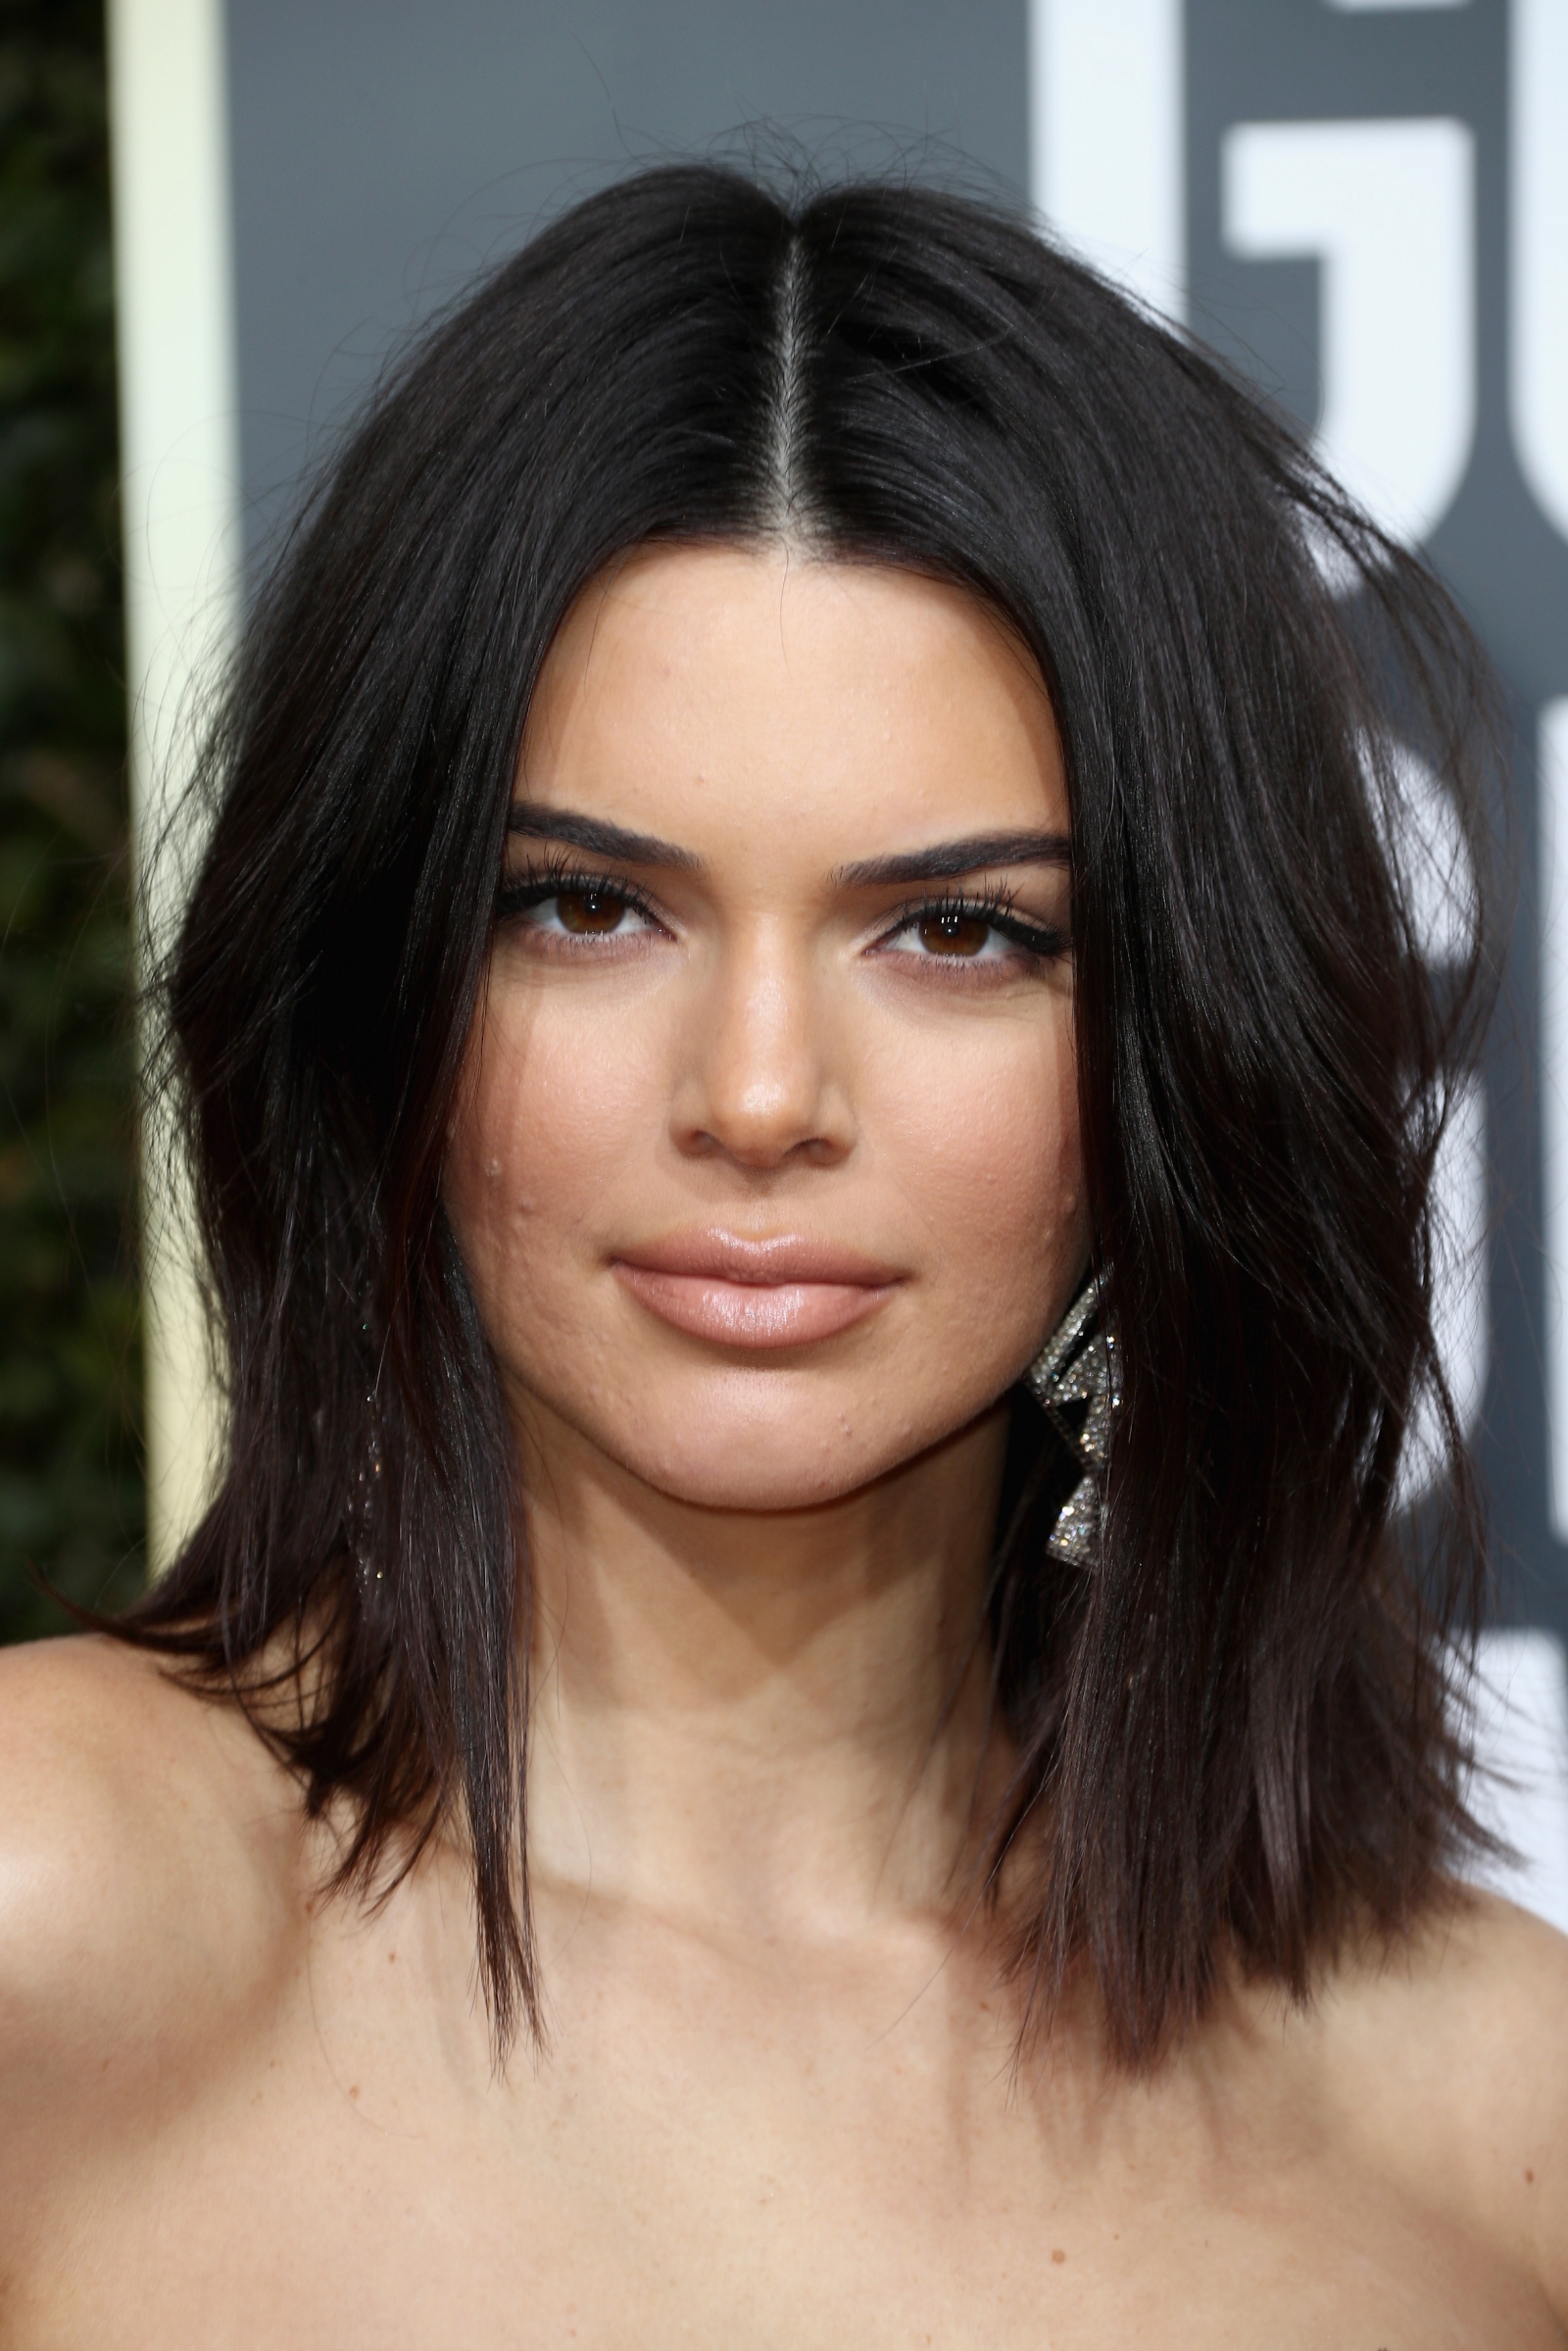 Kendall Jenner addresses Golden Globes acne: 'Never let that sh*t stop you'